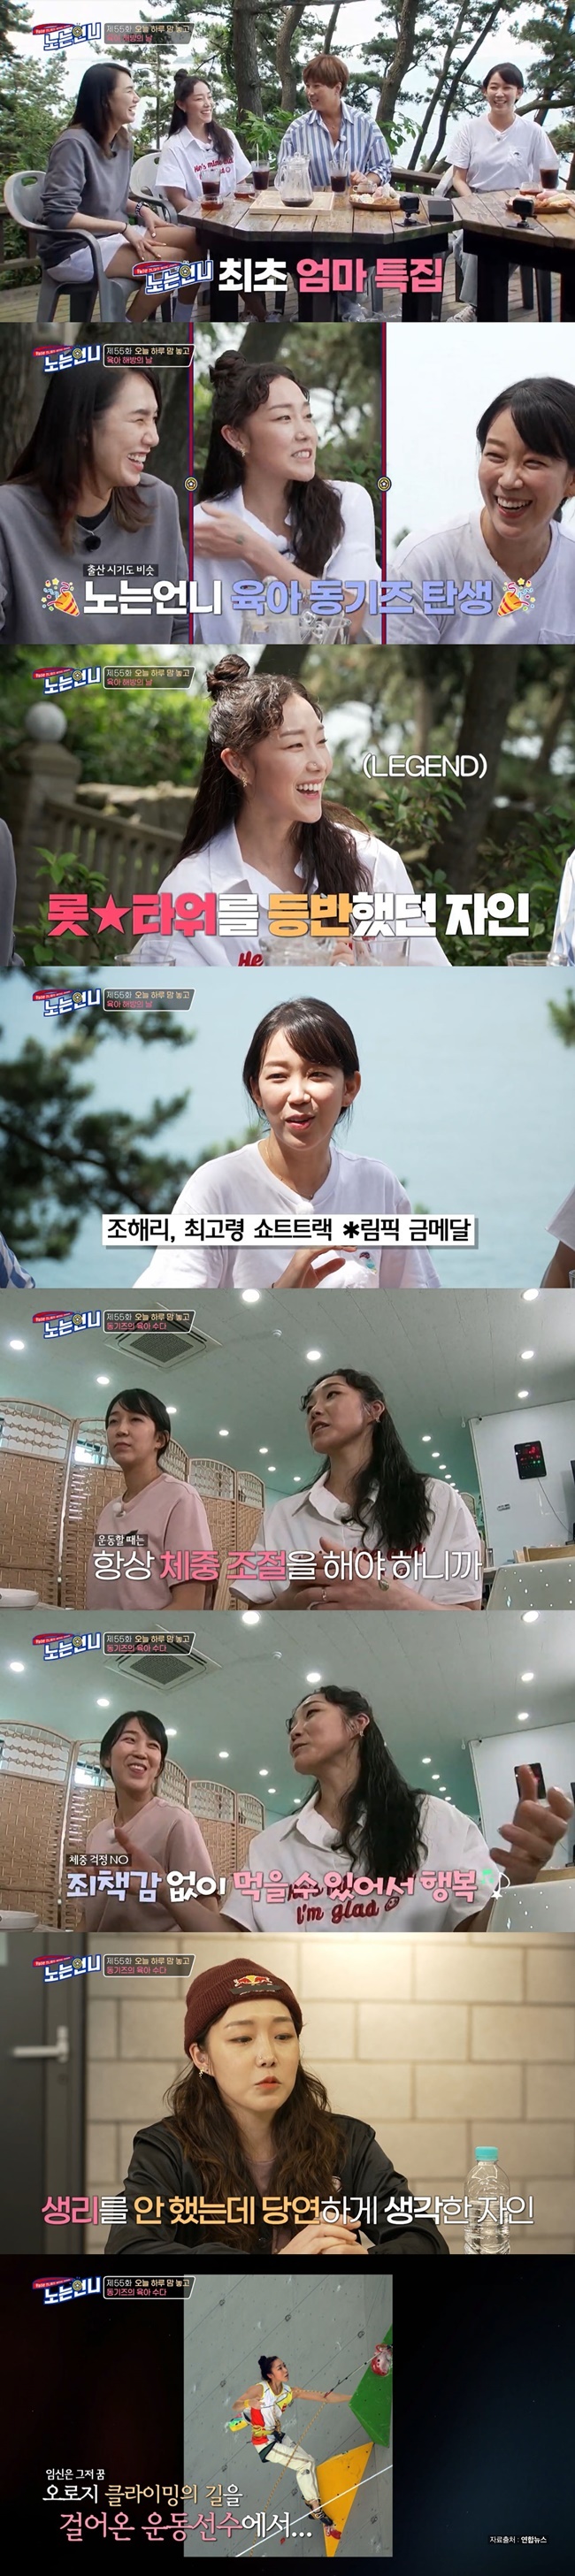 Jain Kim recalls the time of pregnancyOn August 17, the teecast E channel a playing sister featured short track Cho Ha-ri and sports climbing Jain Kim.I am Cho Ha-ri, a former short track national team, who is now retired and is in the process of raising a child in April, said Cho Ha-ri, who appeared as a new face.This is sports climbing player Jain Kim, who recovered from Child Birth last March and is working out a little bit, Jain Kim said.The two men, who each left their children with their husbands and parents, attracted attention by saying that they were the first single outing after Child Birth.I went out for a while, but this is the first time for one night and two days, Cho Ha-ri said. I want to lie down and do nothing.Jain Kim added, I want to have a cool draft beer at the Hope House. Pak said, Today is the day of child-rearing liberation.In addition, the players records were reported. Jain Kim succeeded in climbing the Lotte World Tower, which boasts the highest height in Korea with his bare hands without artificial hold attachment.At that time, Jain Kim donated KRW 5.55 million after climbing a total of 555m, 10,000 won per meter.Jain Kim said, It took 2 hours 29 minutes and 38 seconds. It was too high and I was less scared because it was not realistic.Nowadays, I remember that people in the whole glass cheered me up, he said, I remember how I went up there.I will break someday, but my record is not broken yet, and it is the oldest short track gold medalist in Korea, said Cho Ha-ri.Earlier, Cho Ha-ri won a gold medal at the age of 29 in the 3,000-meter relay division of the 2014 Sochi Winter Olympics.Cho Ha-ri said, My peers start to quit, and I have a gap with my juniors.